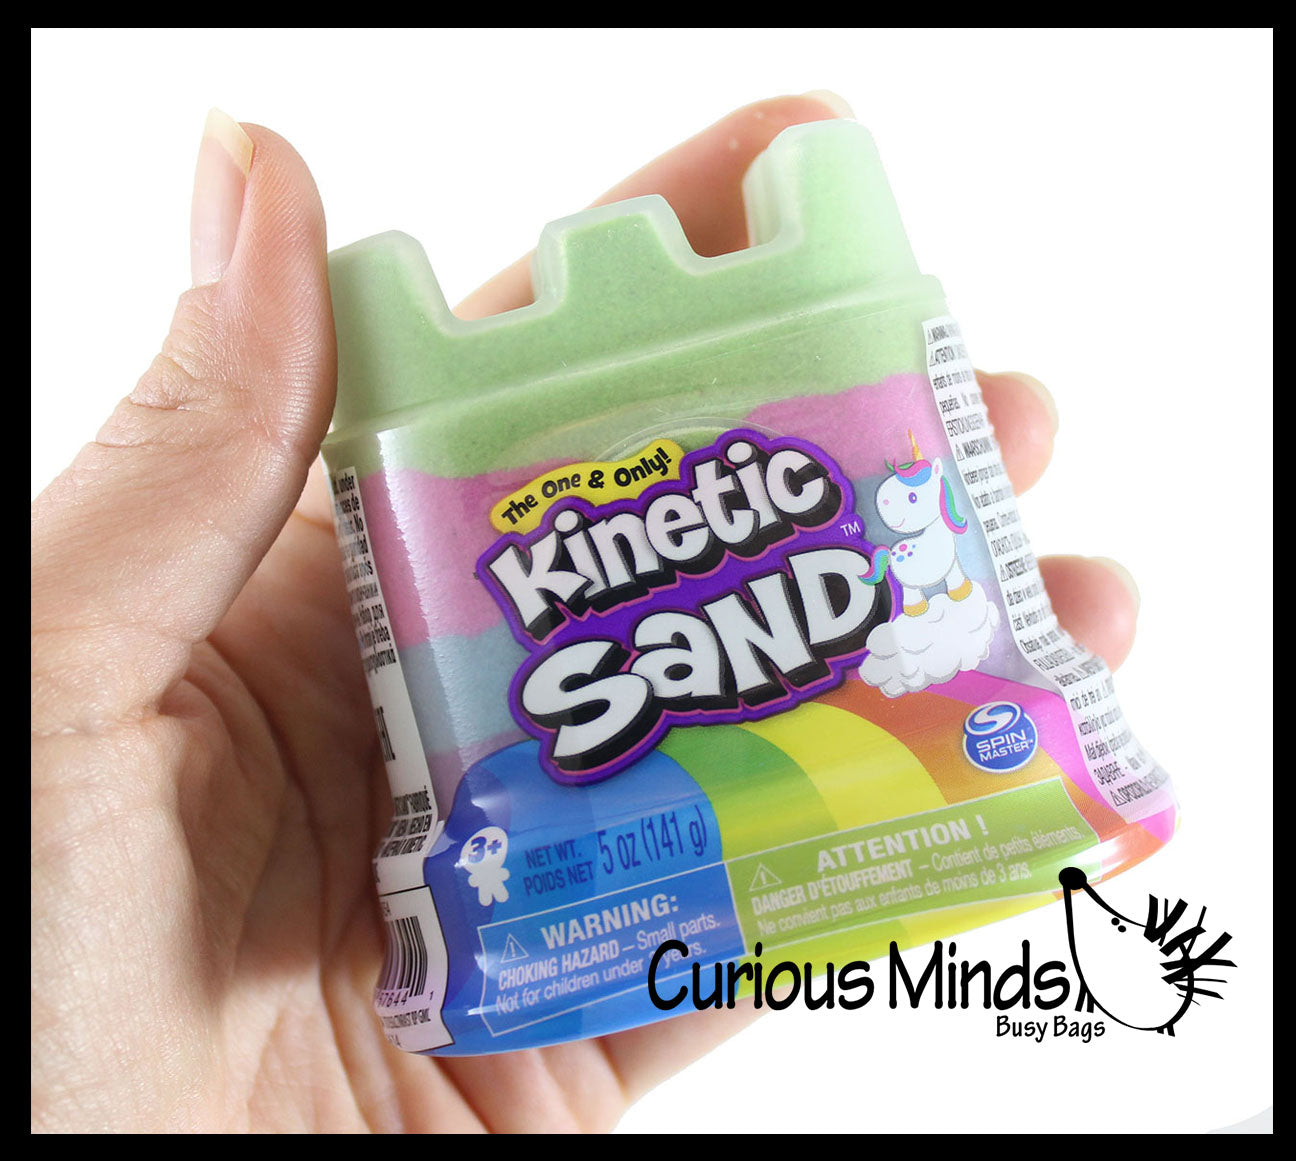 Kinetic Sand Single Container - 5oz - Violet